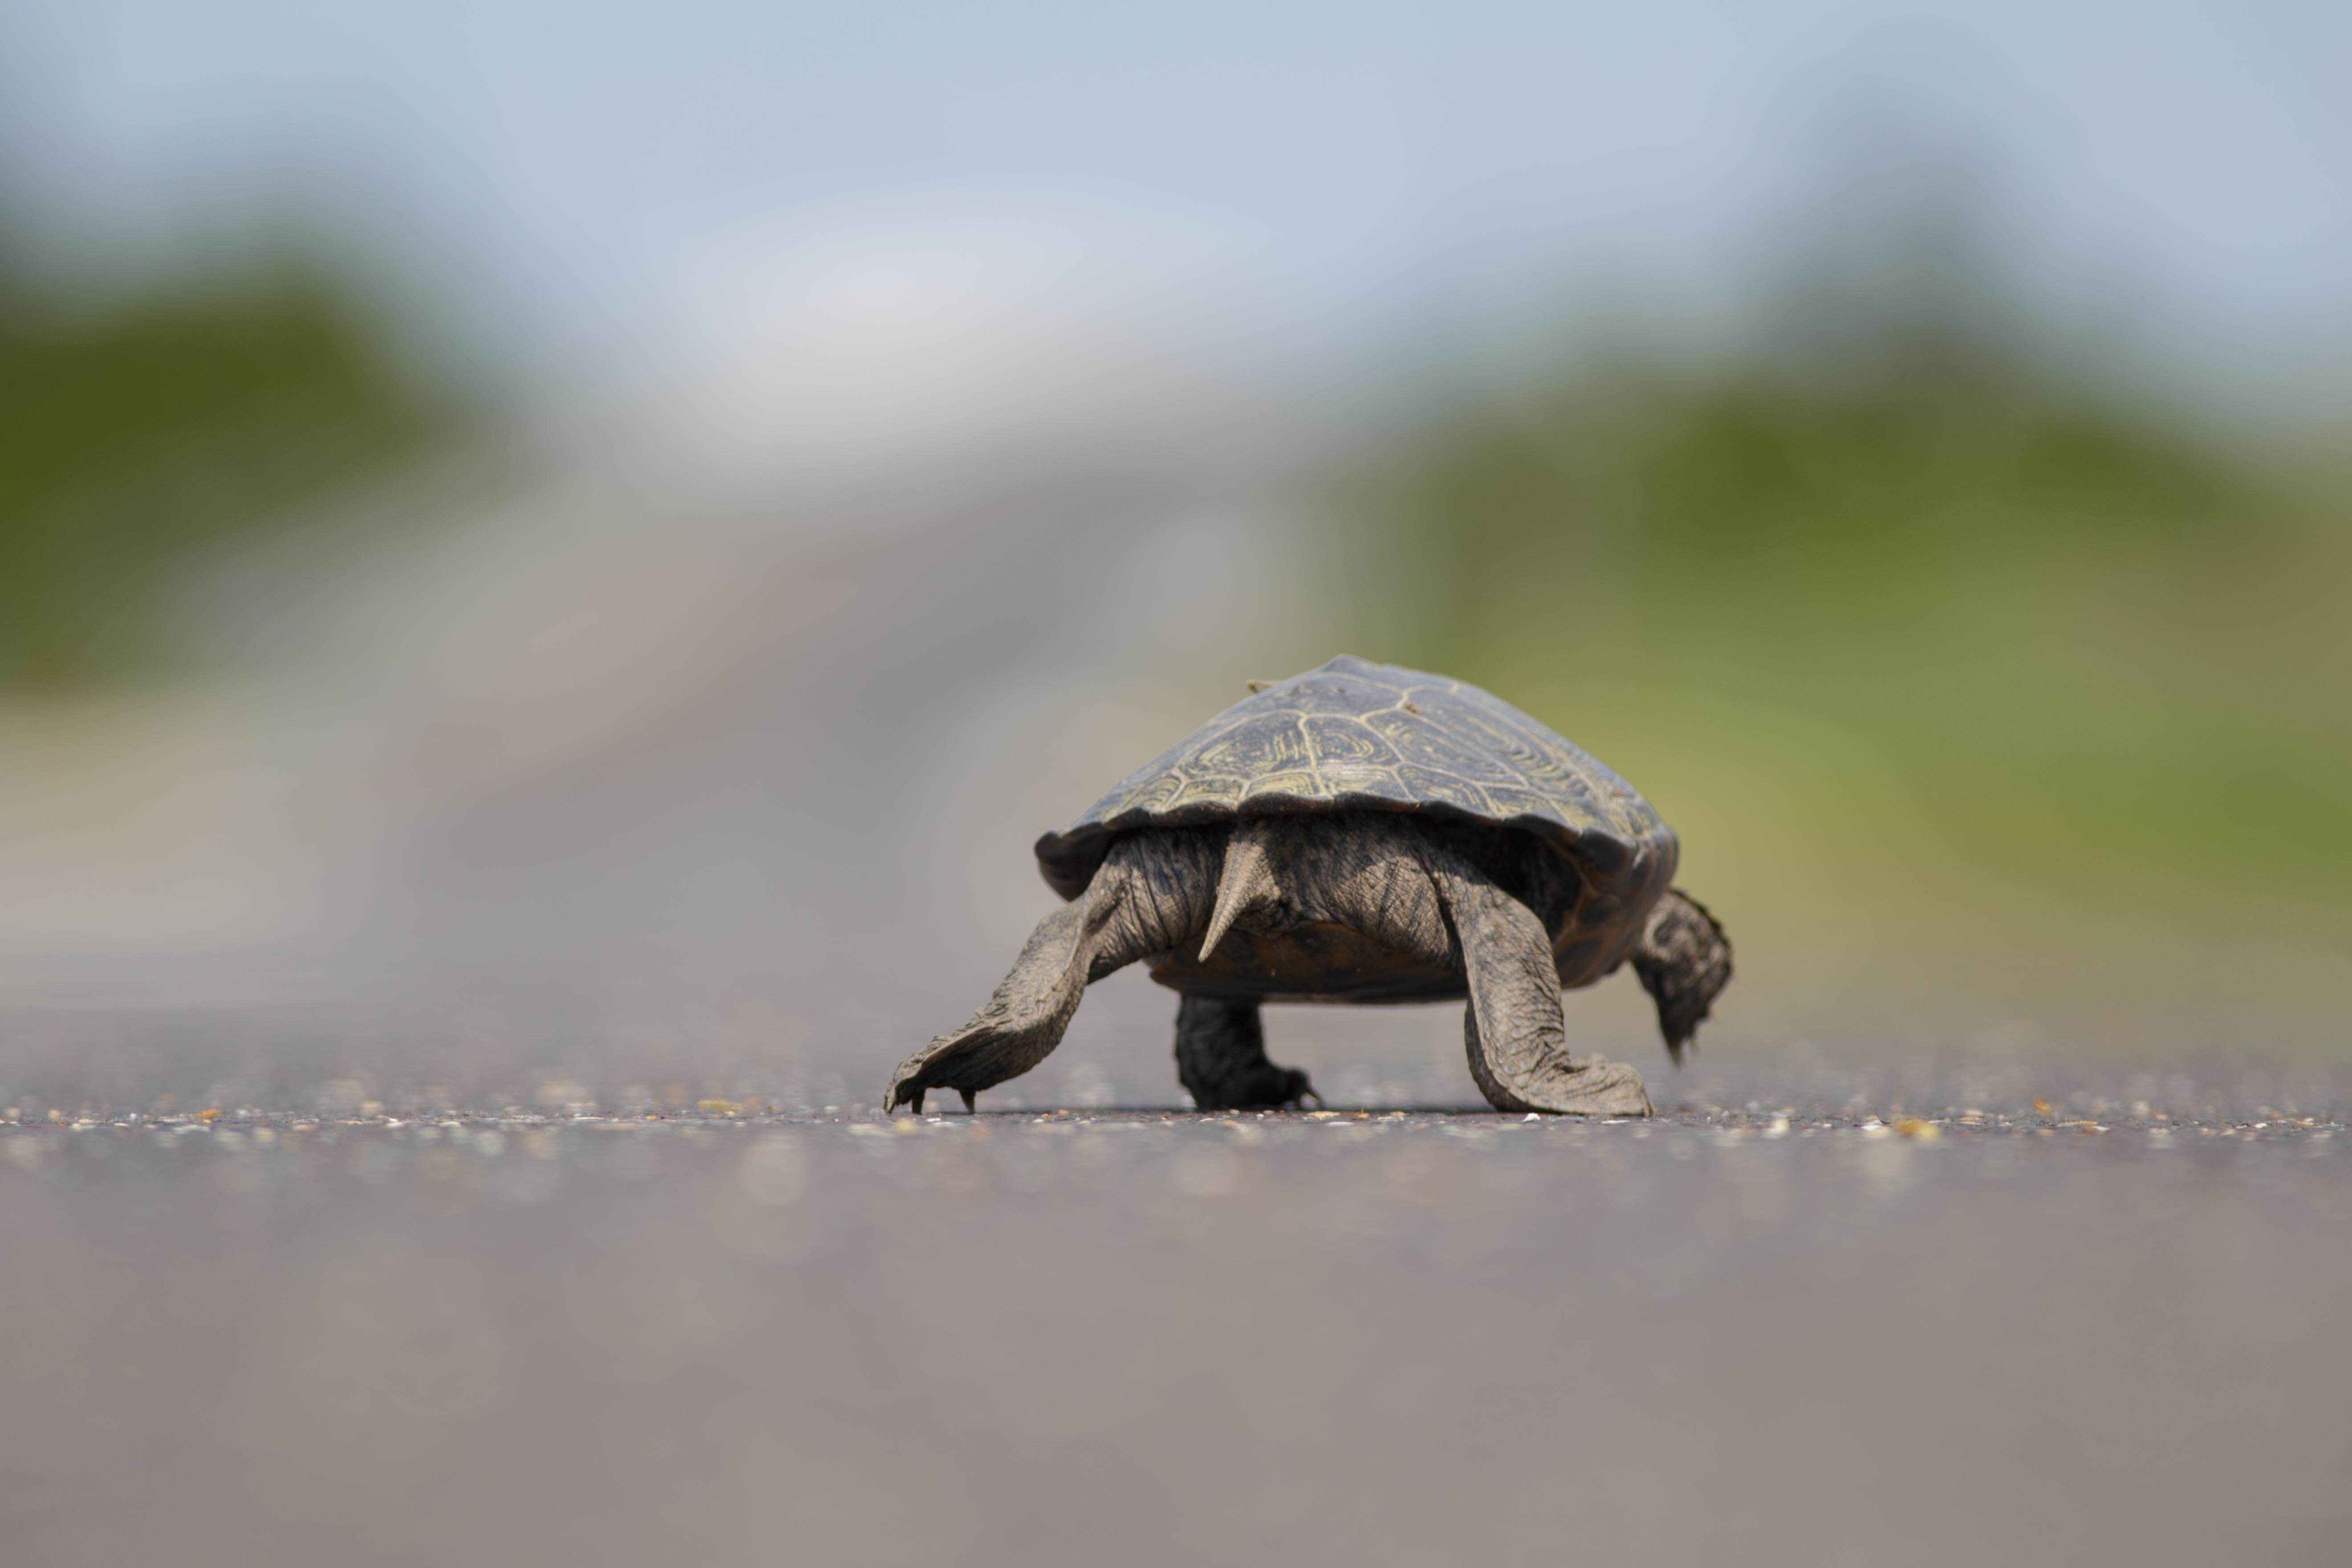  A northern diamondback terrapin crossing a southern Jersey Shore road on Wednesday. (Image courtesy of Ben Wurst/Conserve Wildlife Foundation of New Jersey) 